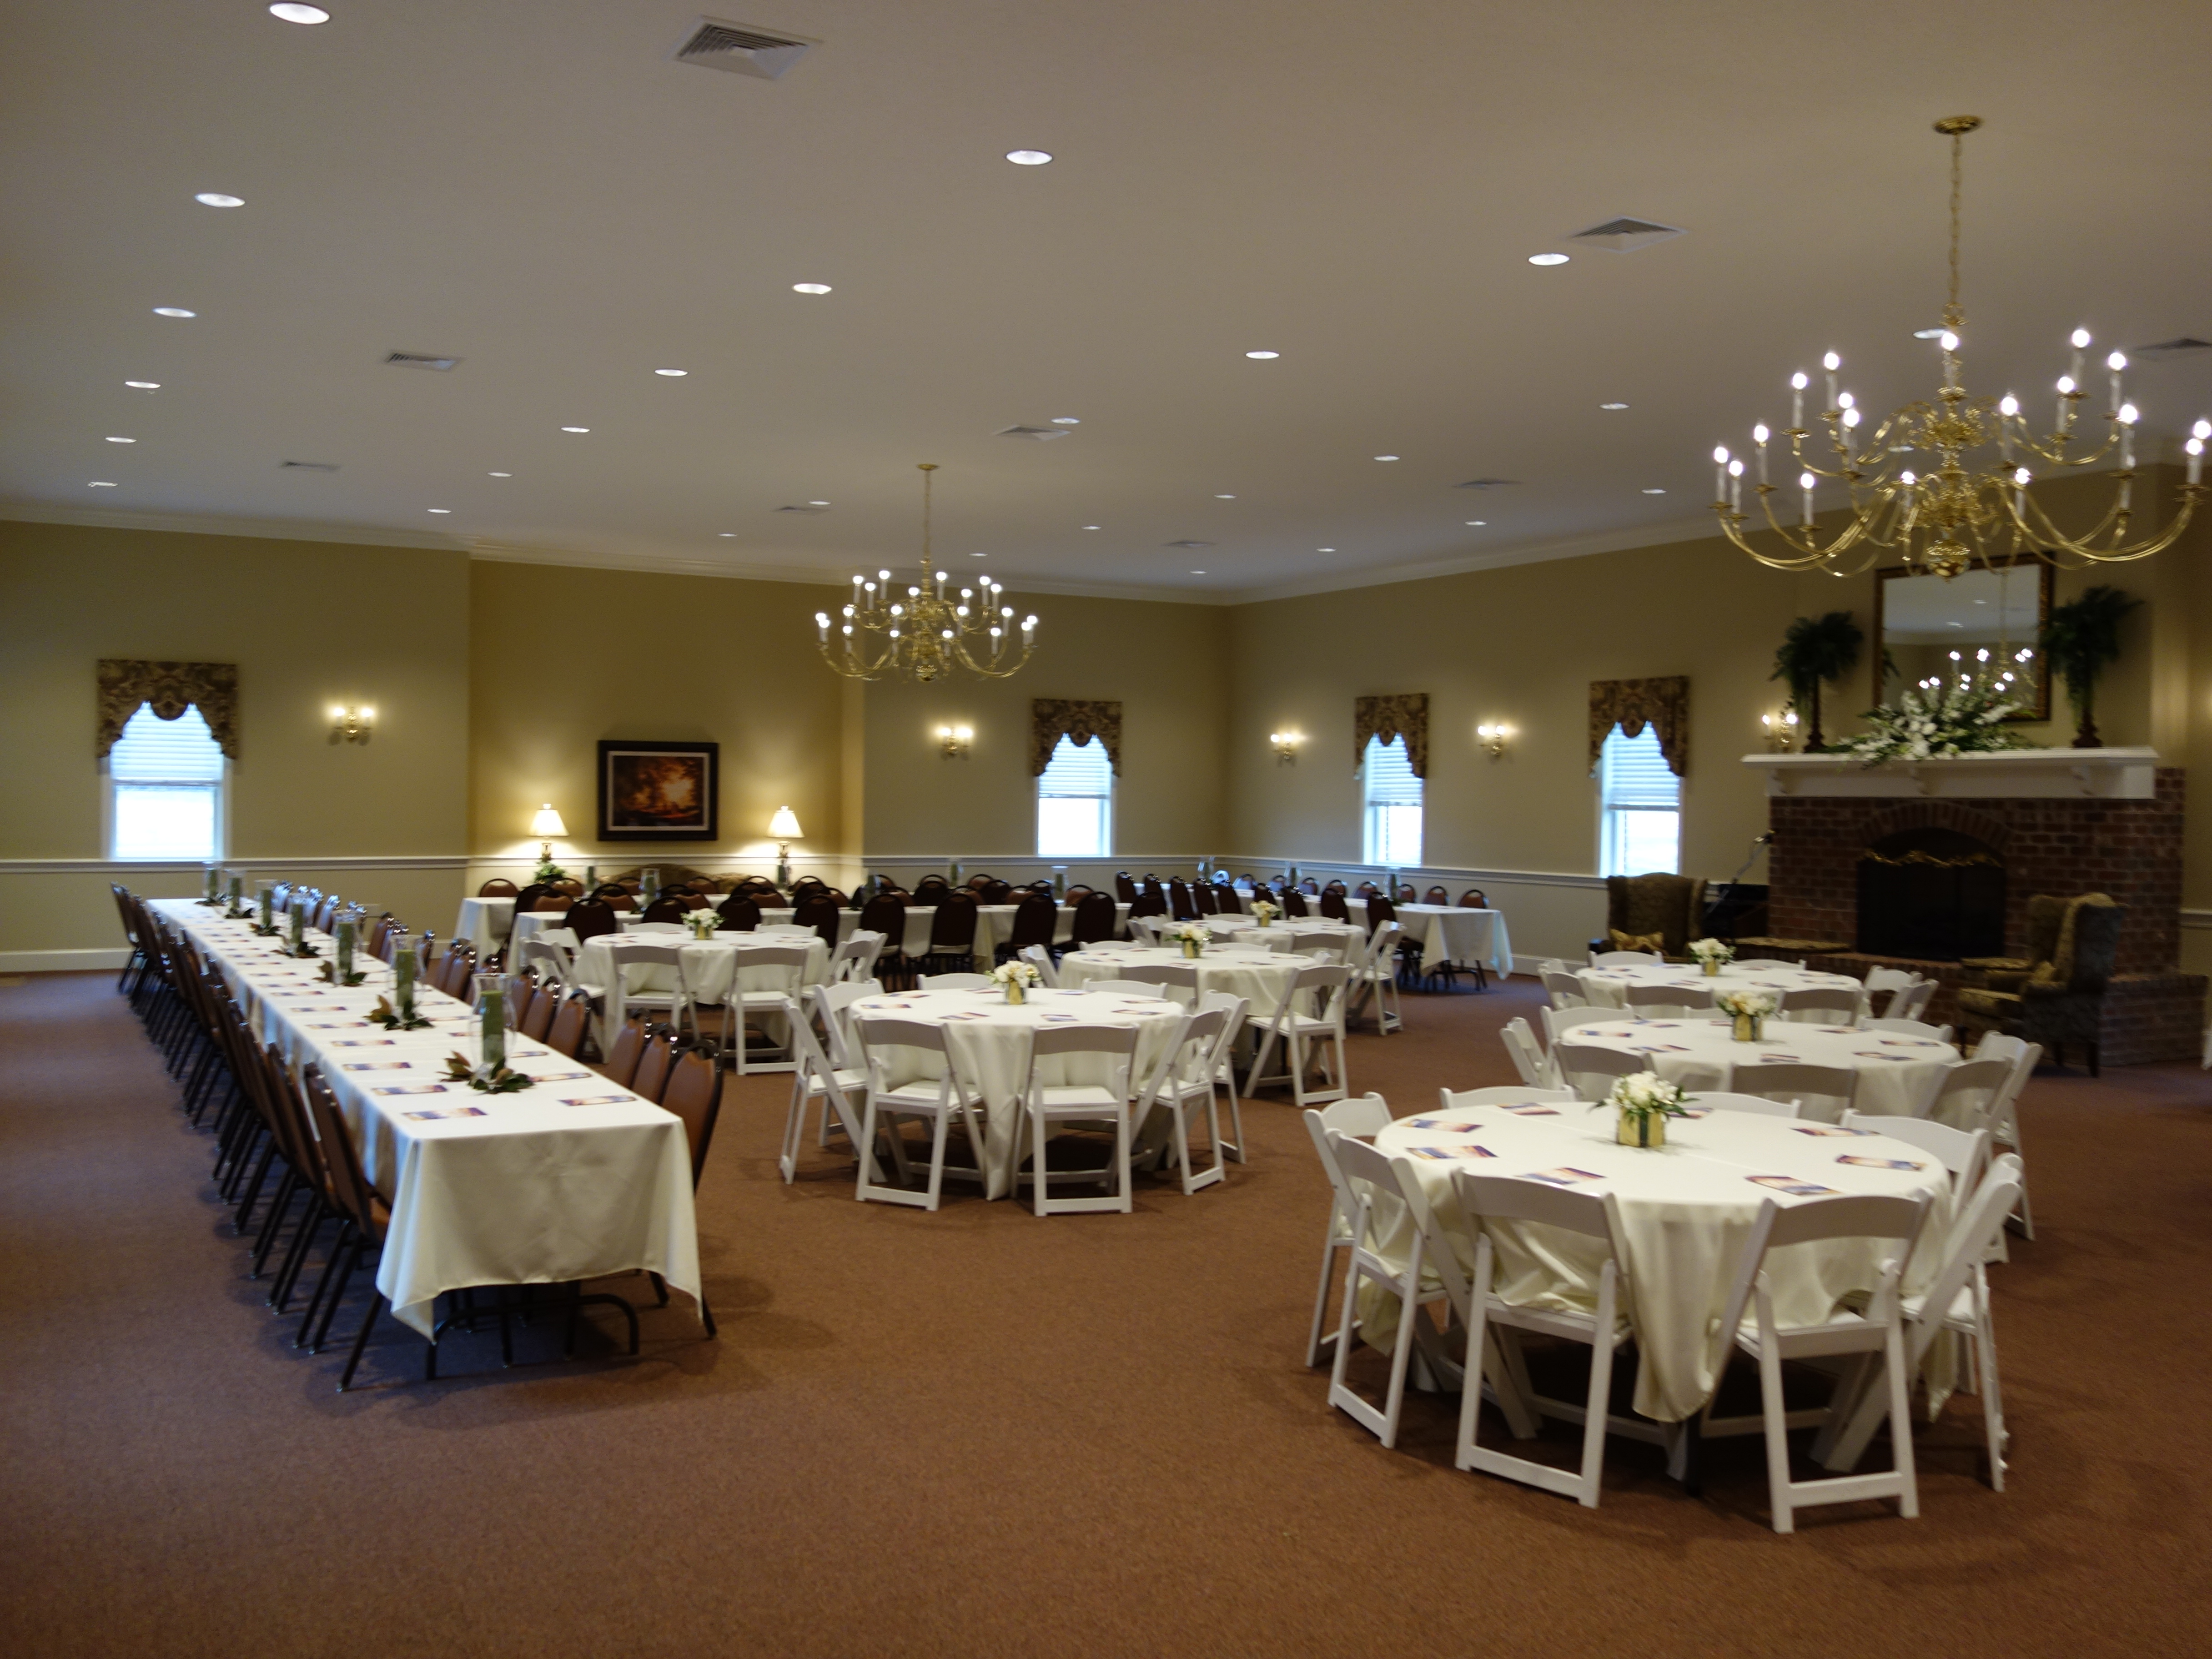 Finished fellowship hall interior 